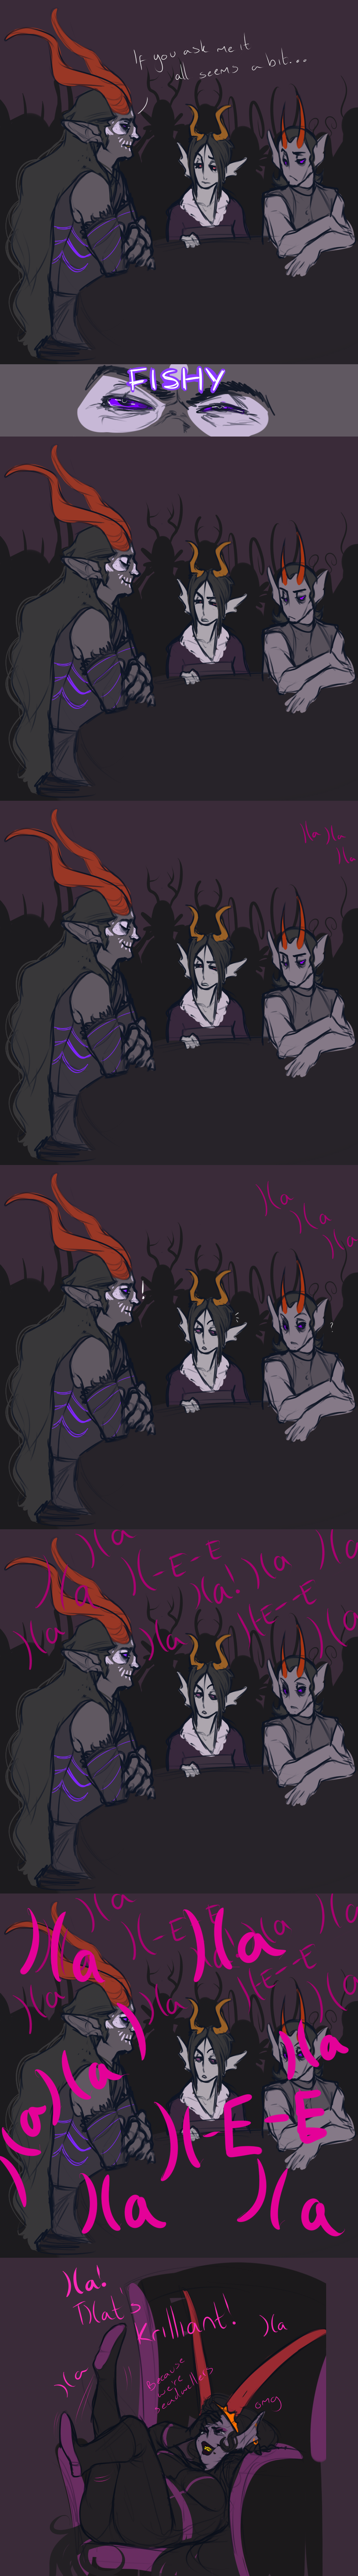 ! ? ancestors body_modification fantroll grand_highblood her_imperious_condescension kiwitank motherglubbers punstuck shipping sitting